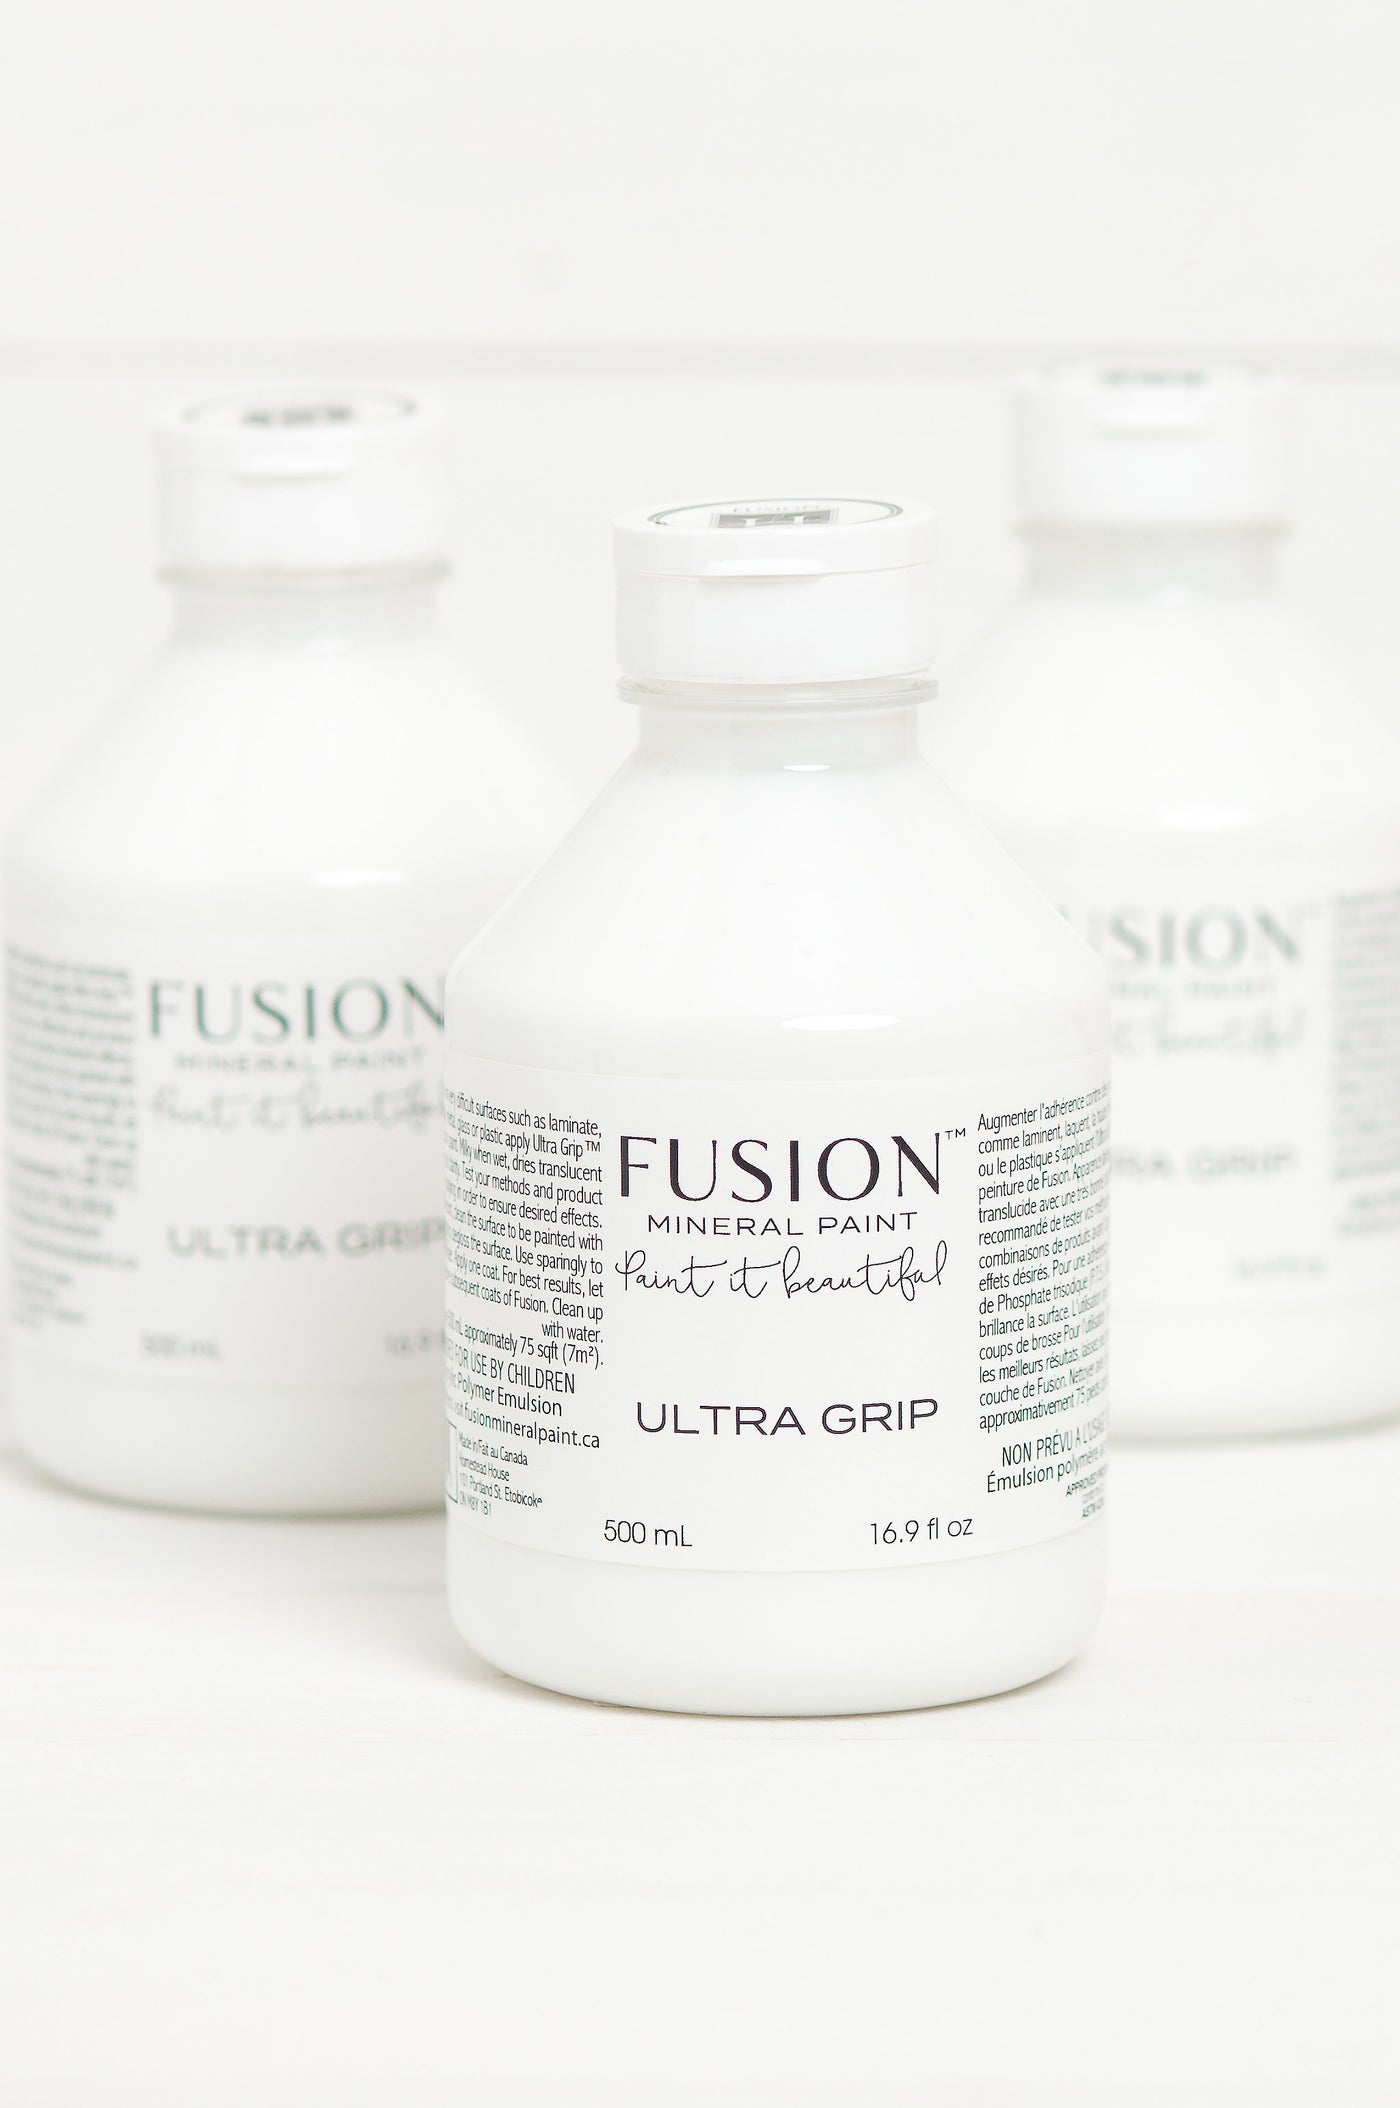 ULTRA GRIP - FUSION MINERAL PAINT